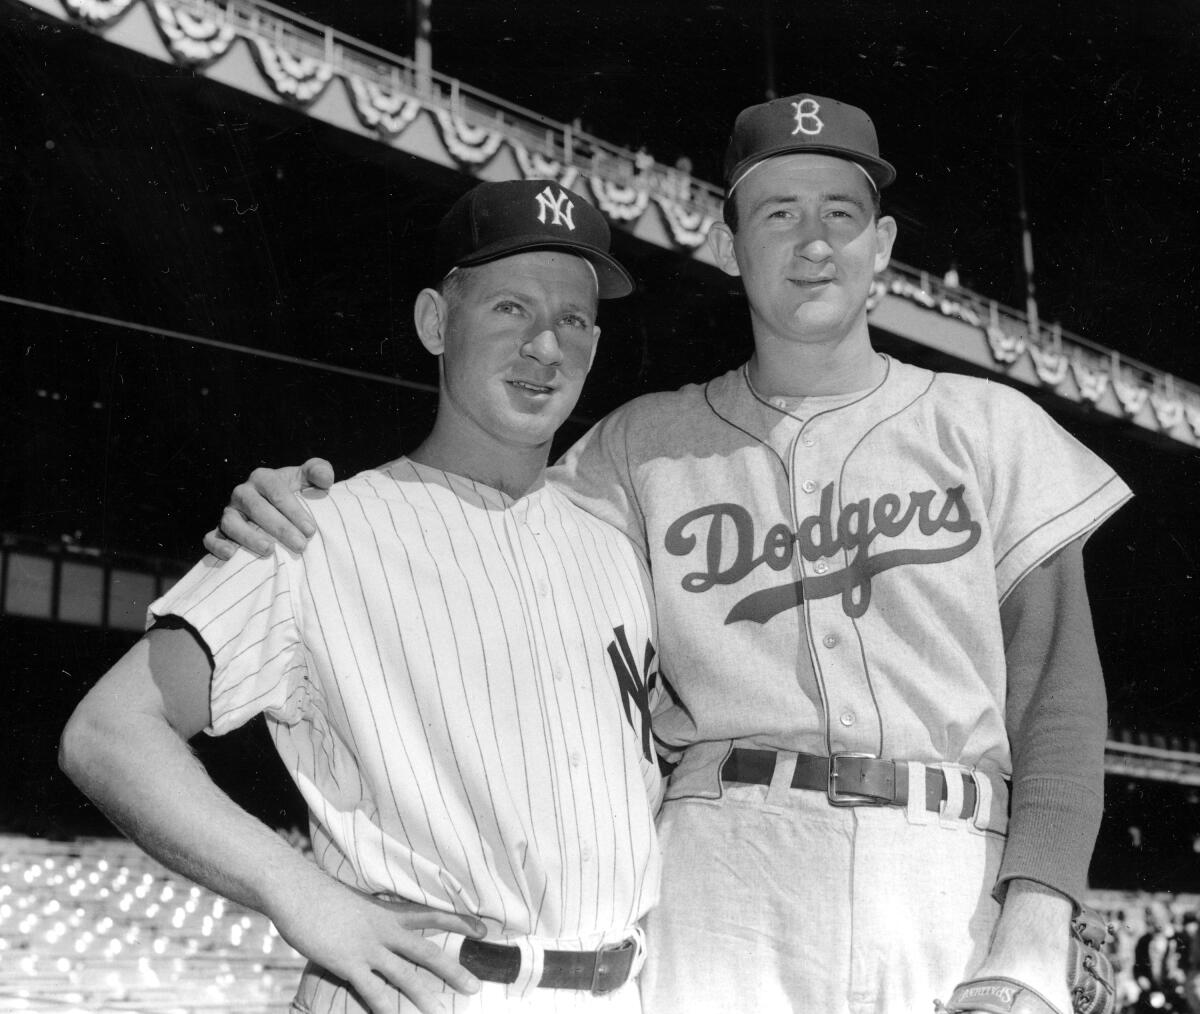 Opposing pitchers Whitey Ford, New York Yankees, and Roger Craig, Brooklyn Dodgers, before Game 3 of the 1956 World Series.